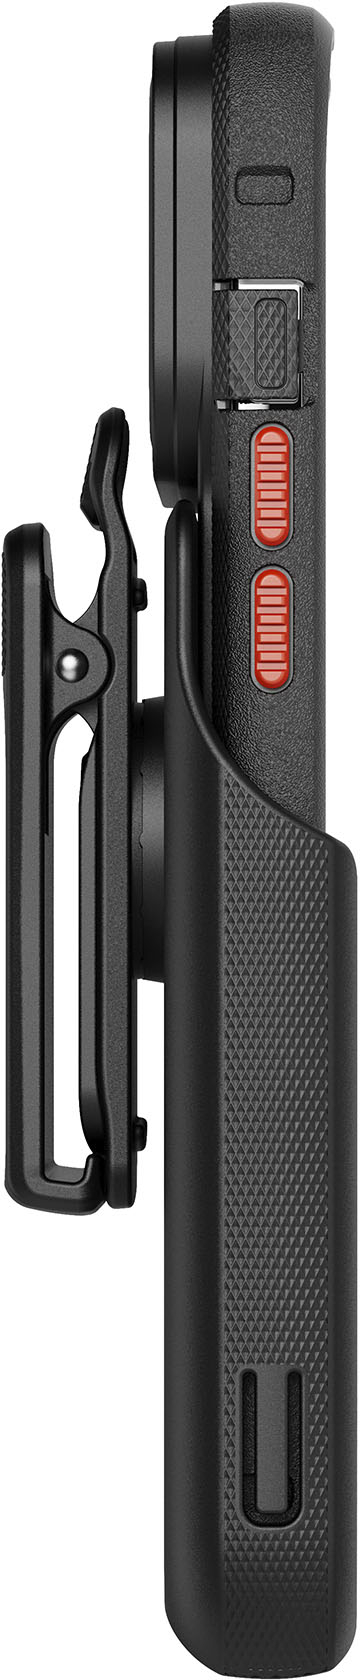 Evo Max - Apple iPhone 13 Mini Case with Holster - Off Black